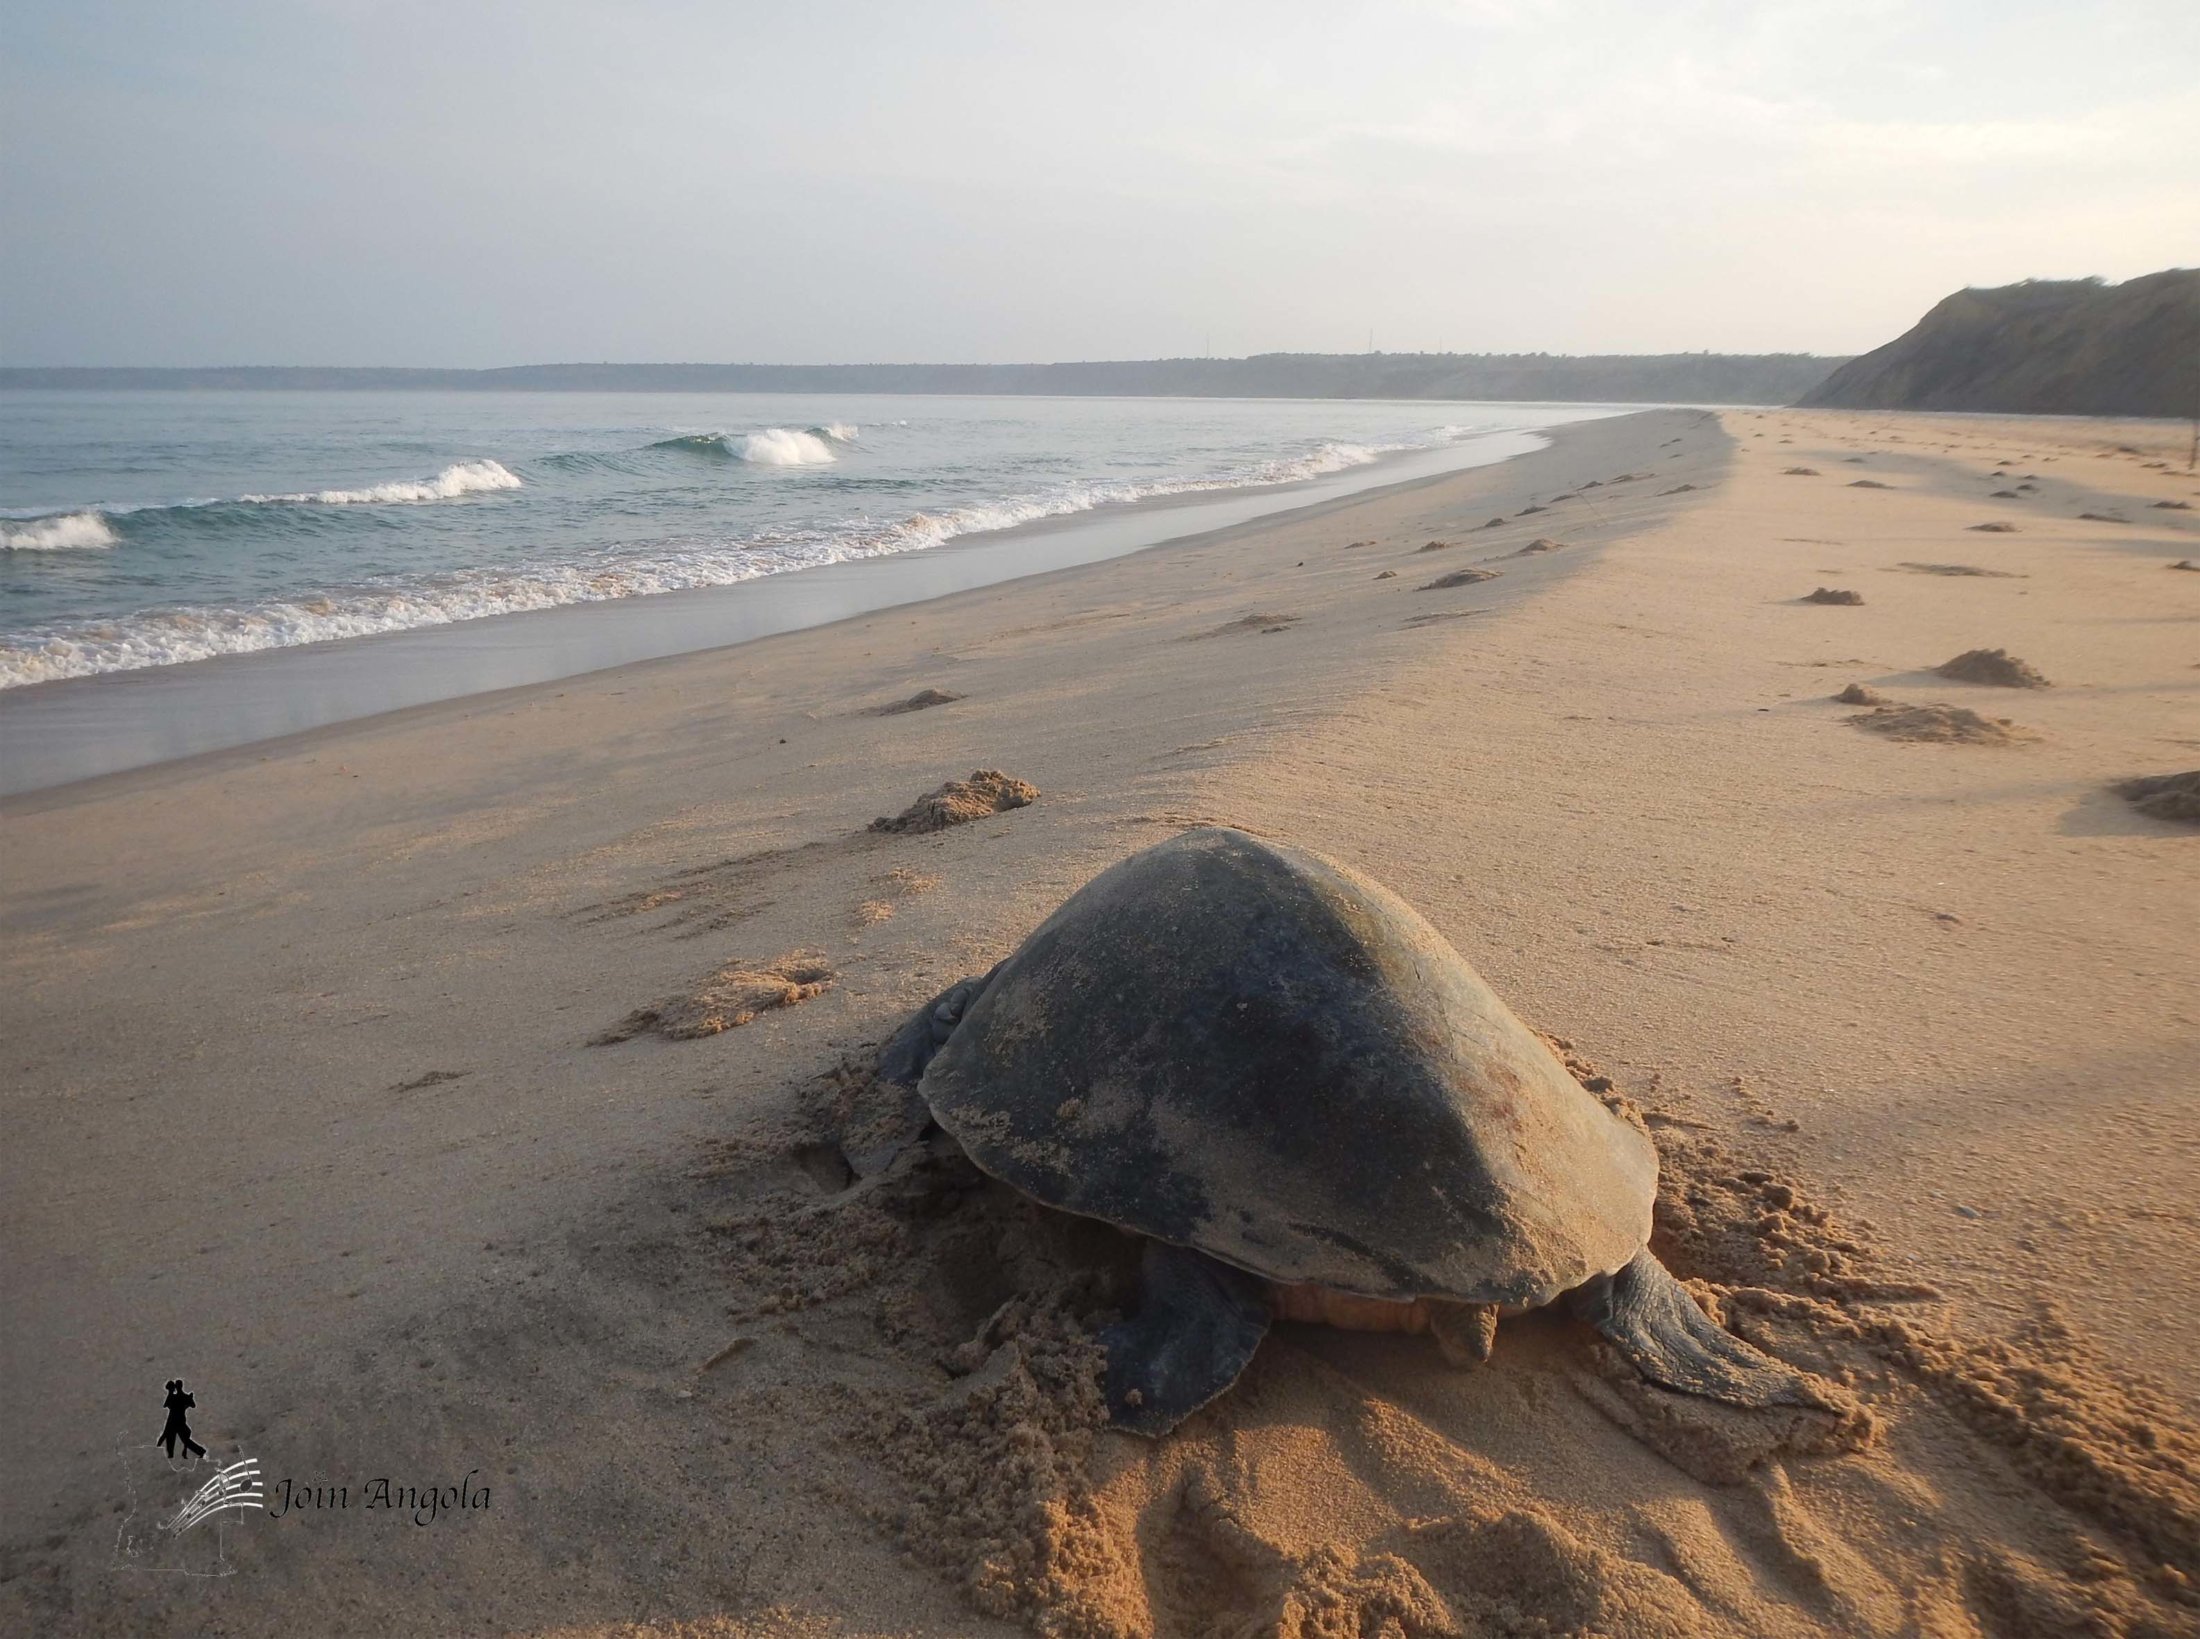 A turtle in Cabo Ledo. As in many parts of the world, the species is in danger.